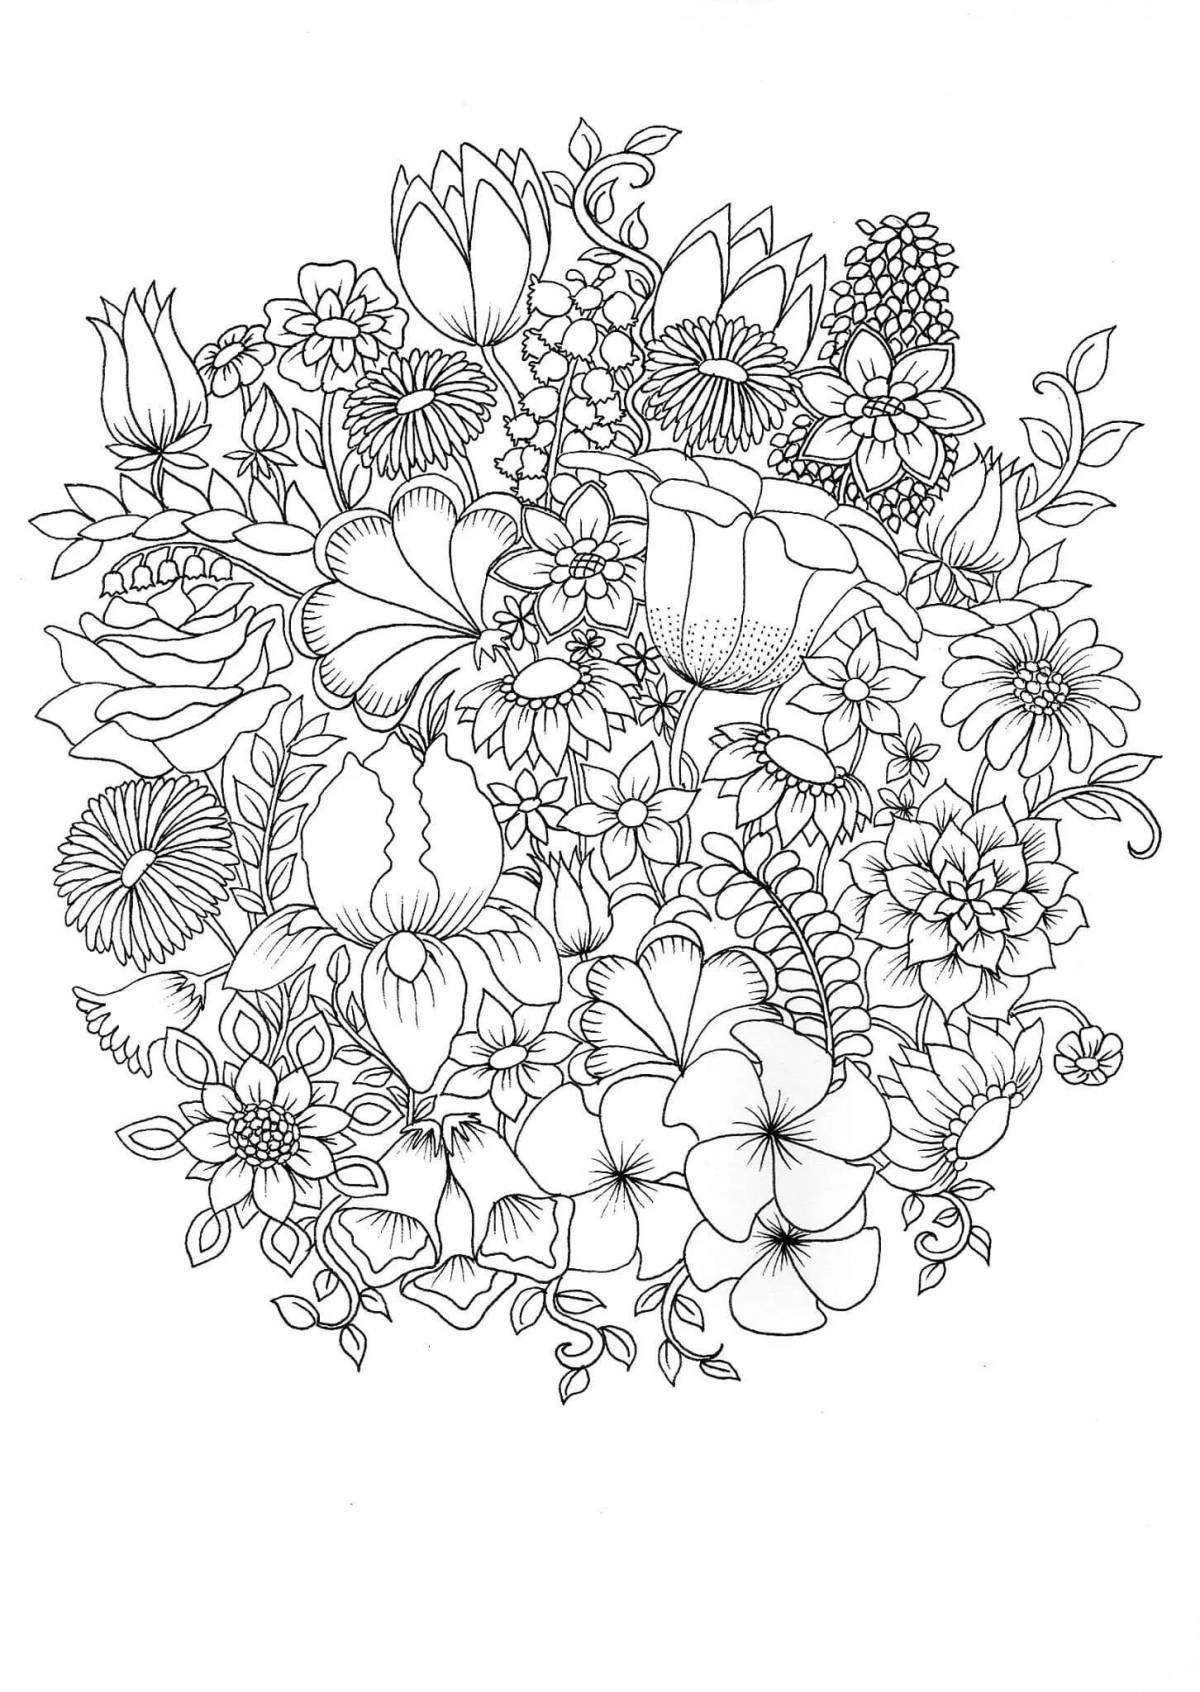 Delightful coloring flowers for girls complex